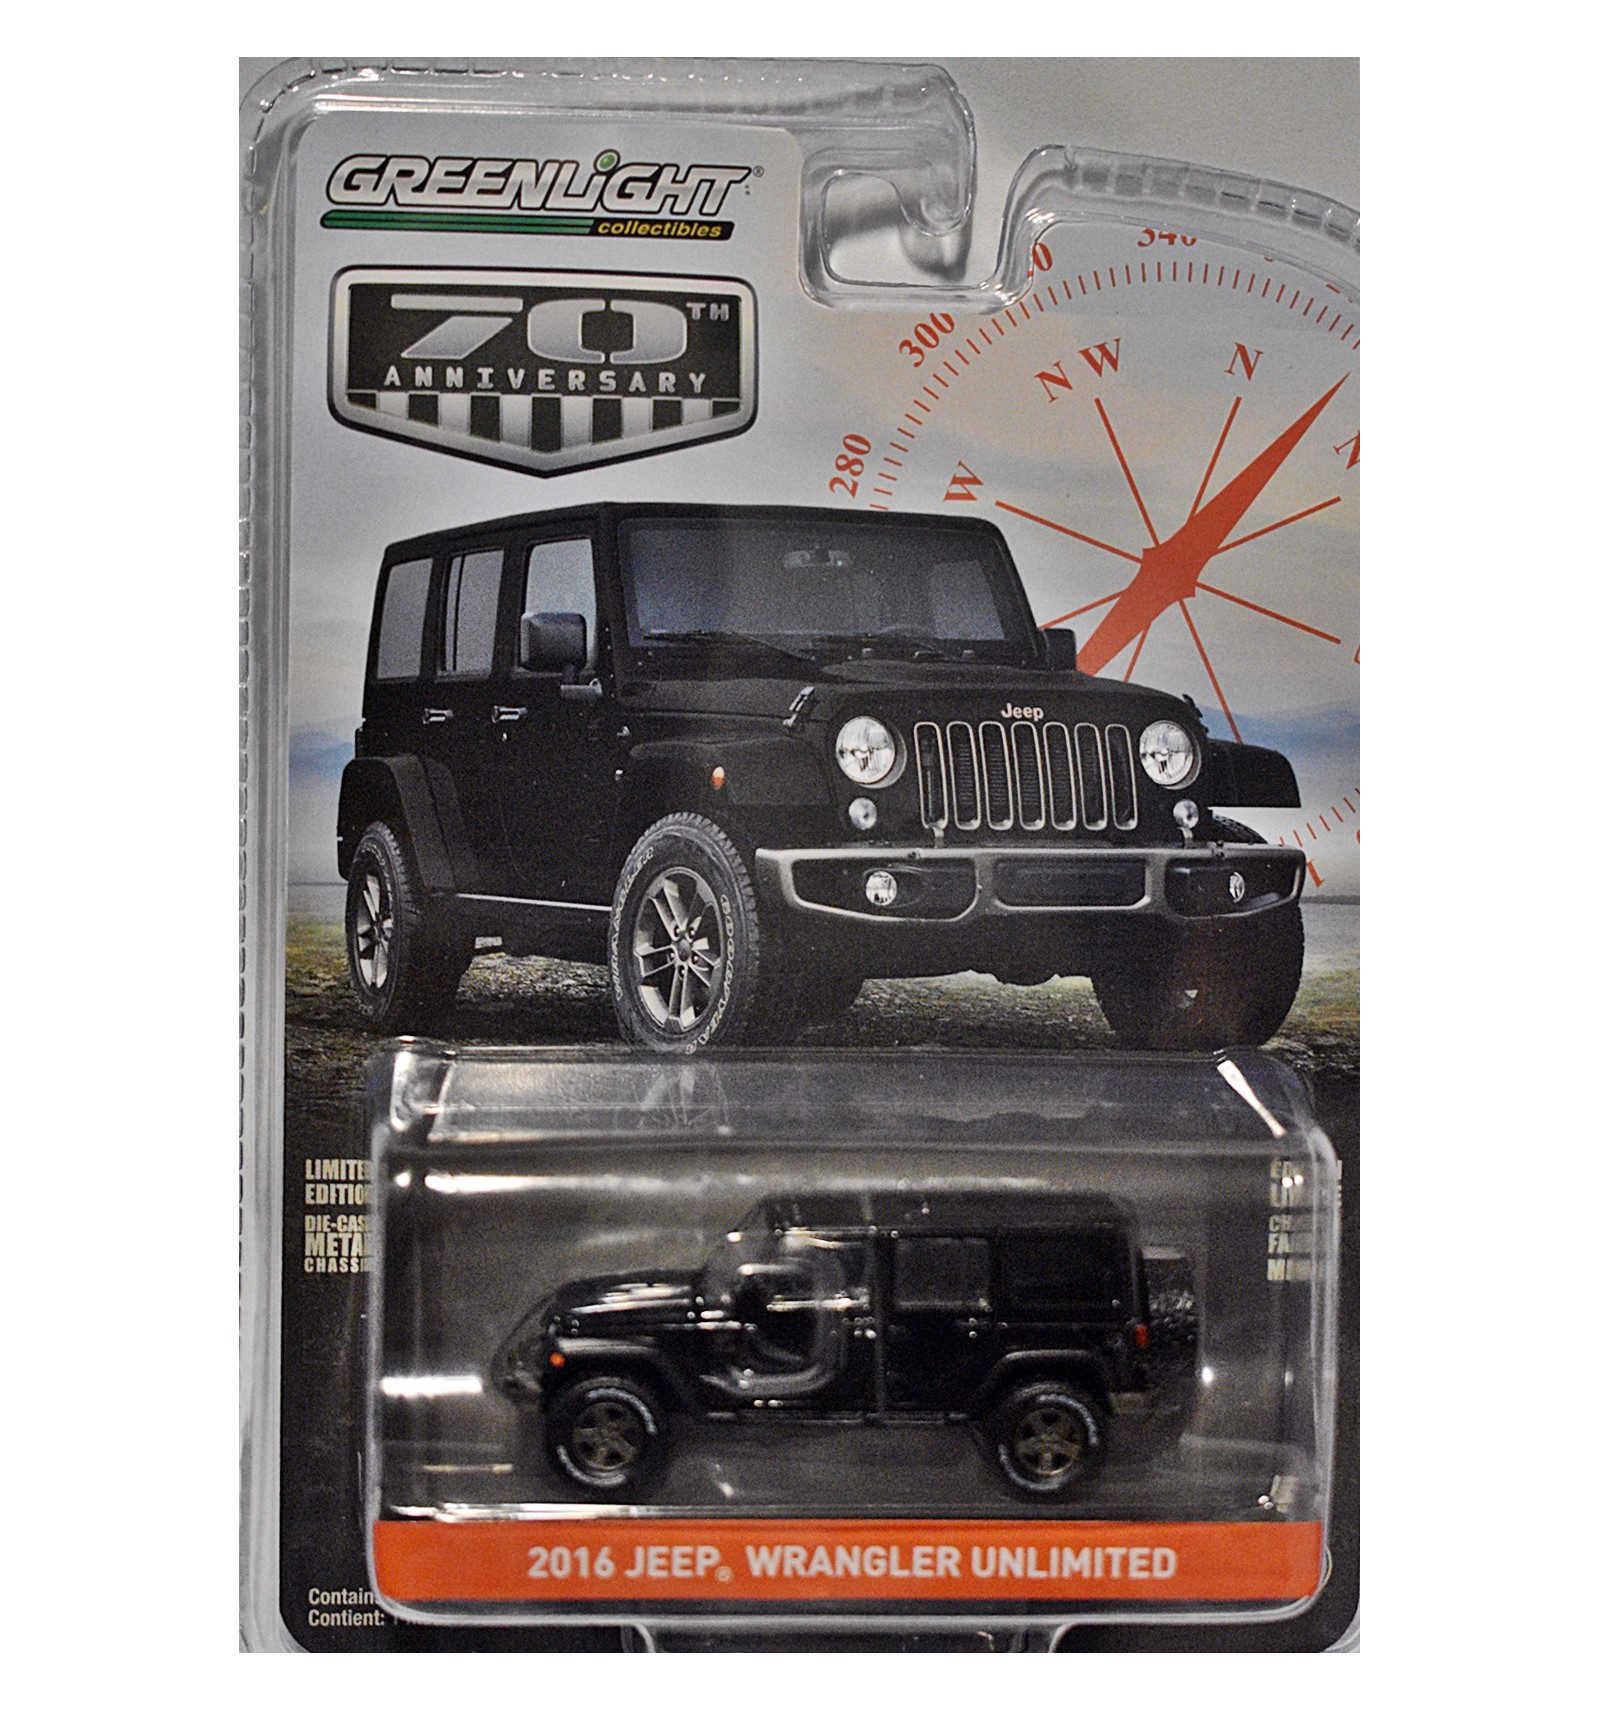 1/64 Greenlight 75th Anniversry 2016 Jeep Wrangler Unlimited Diecast model car